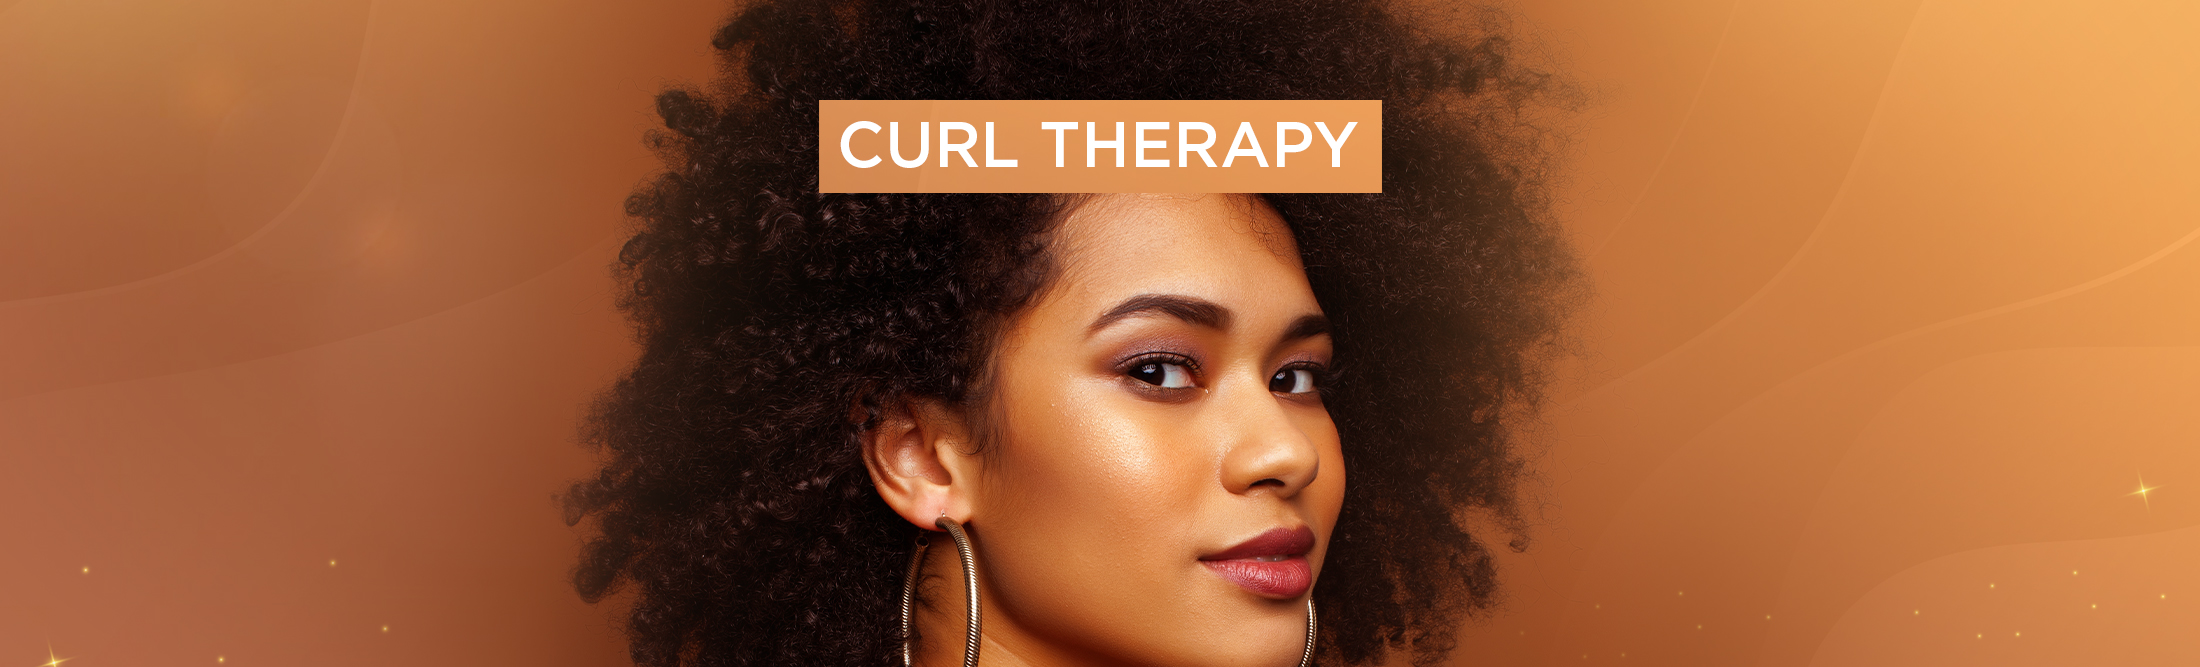 Curl Therapy